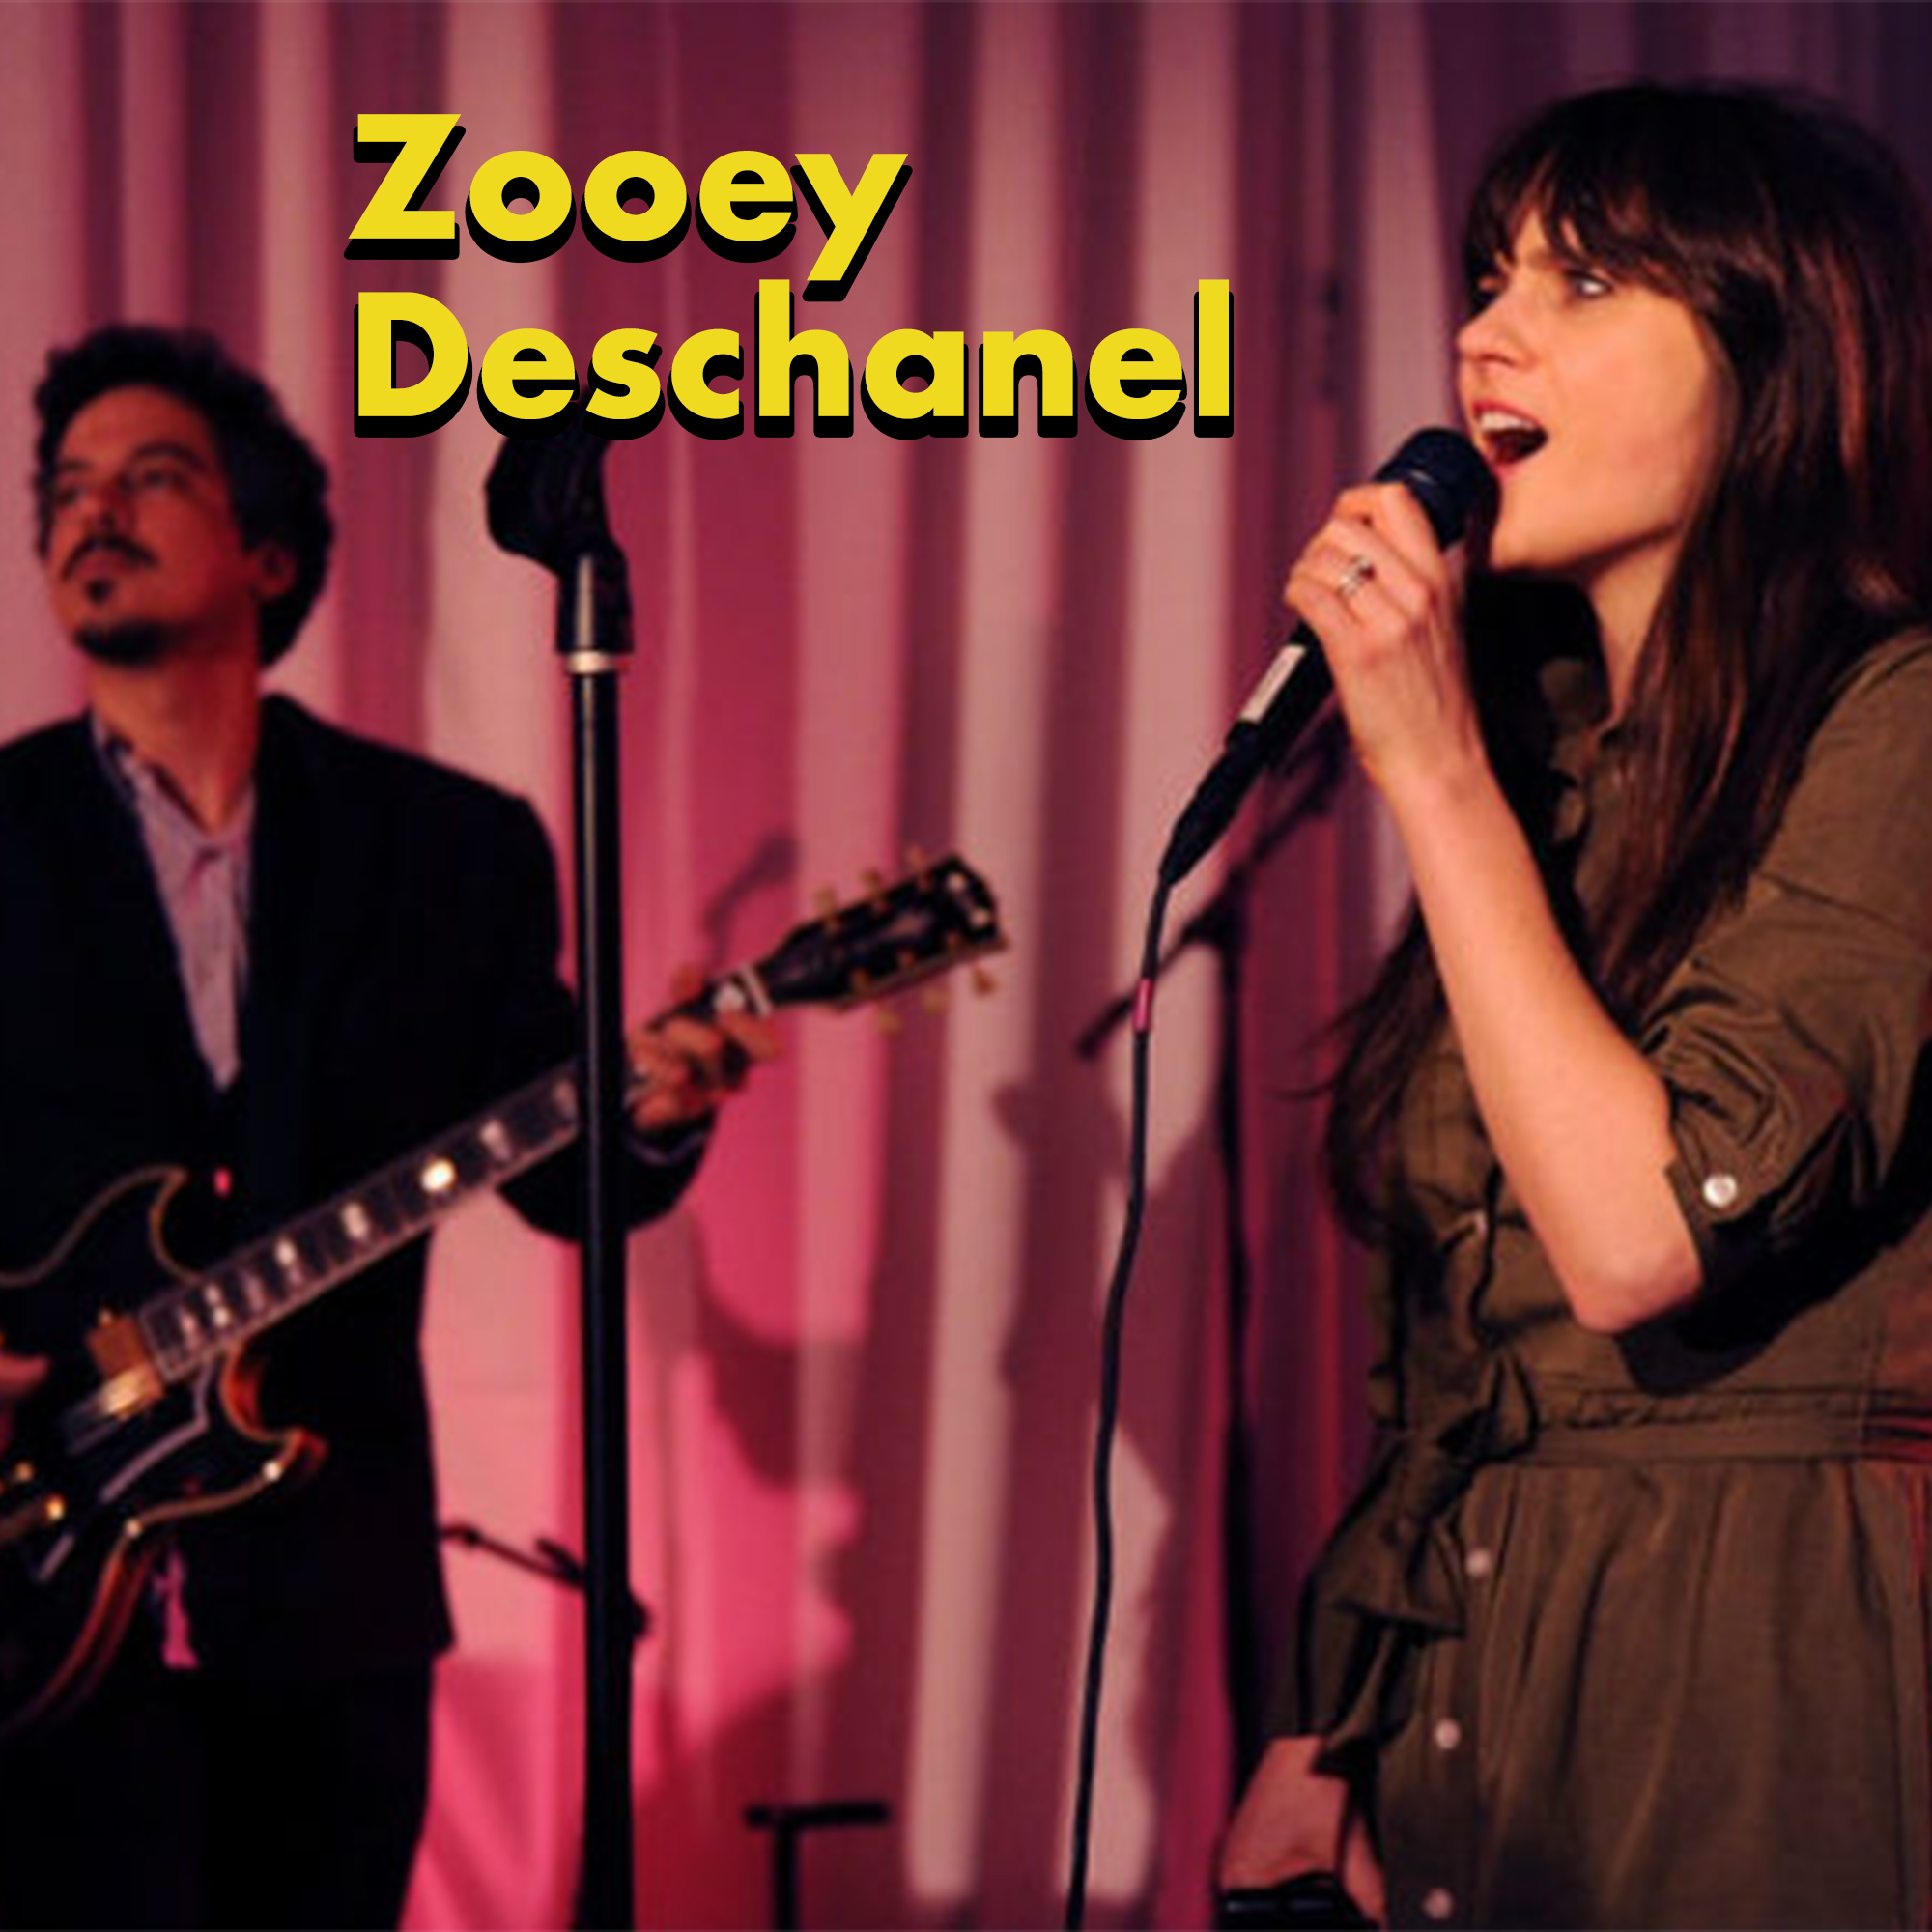 actors in bands - she and him vs death cab for cutie - Zooey Deschanel